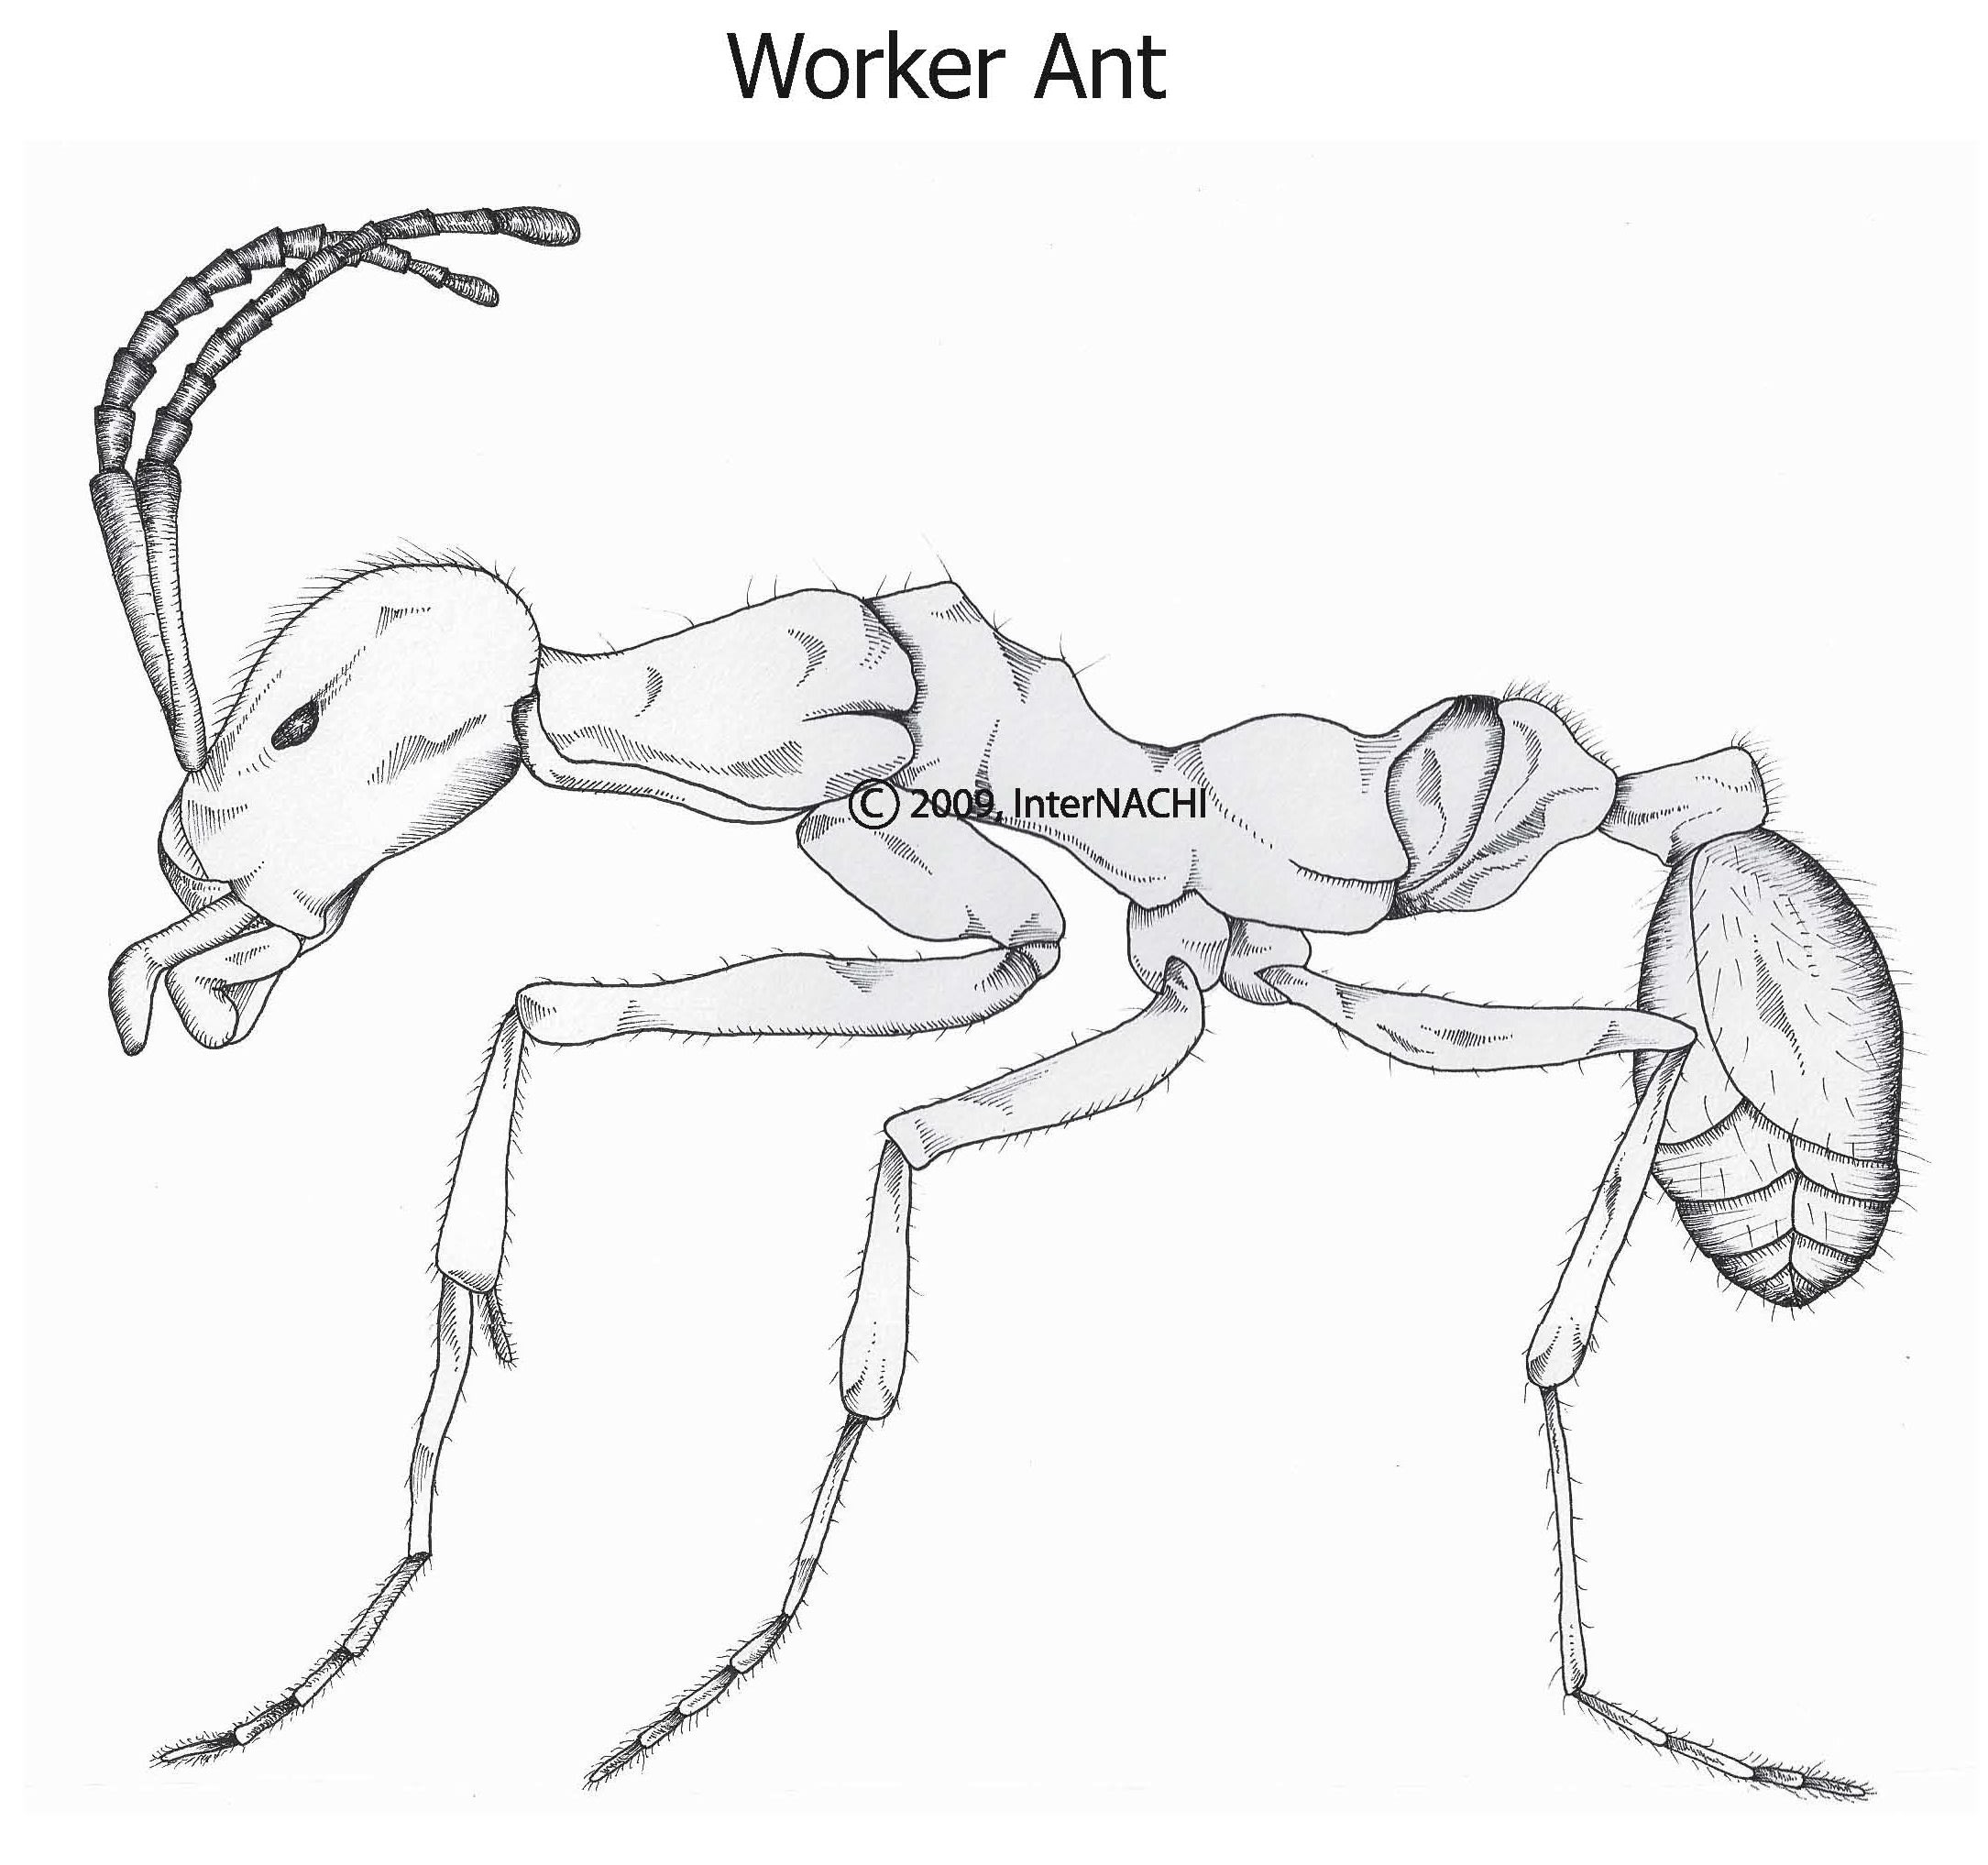 Worker ant.